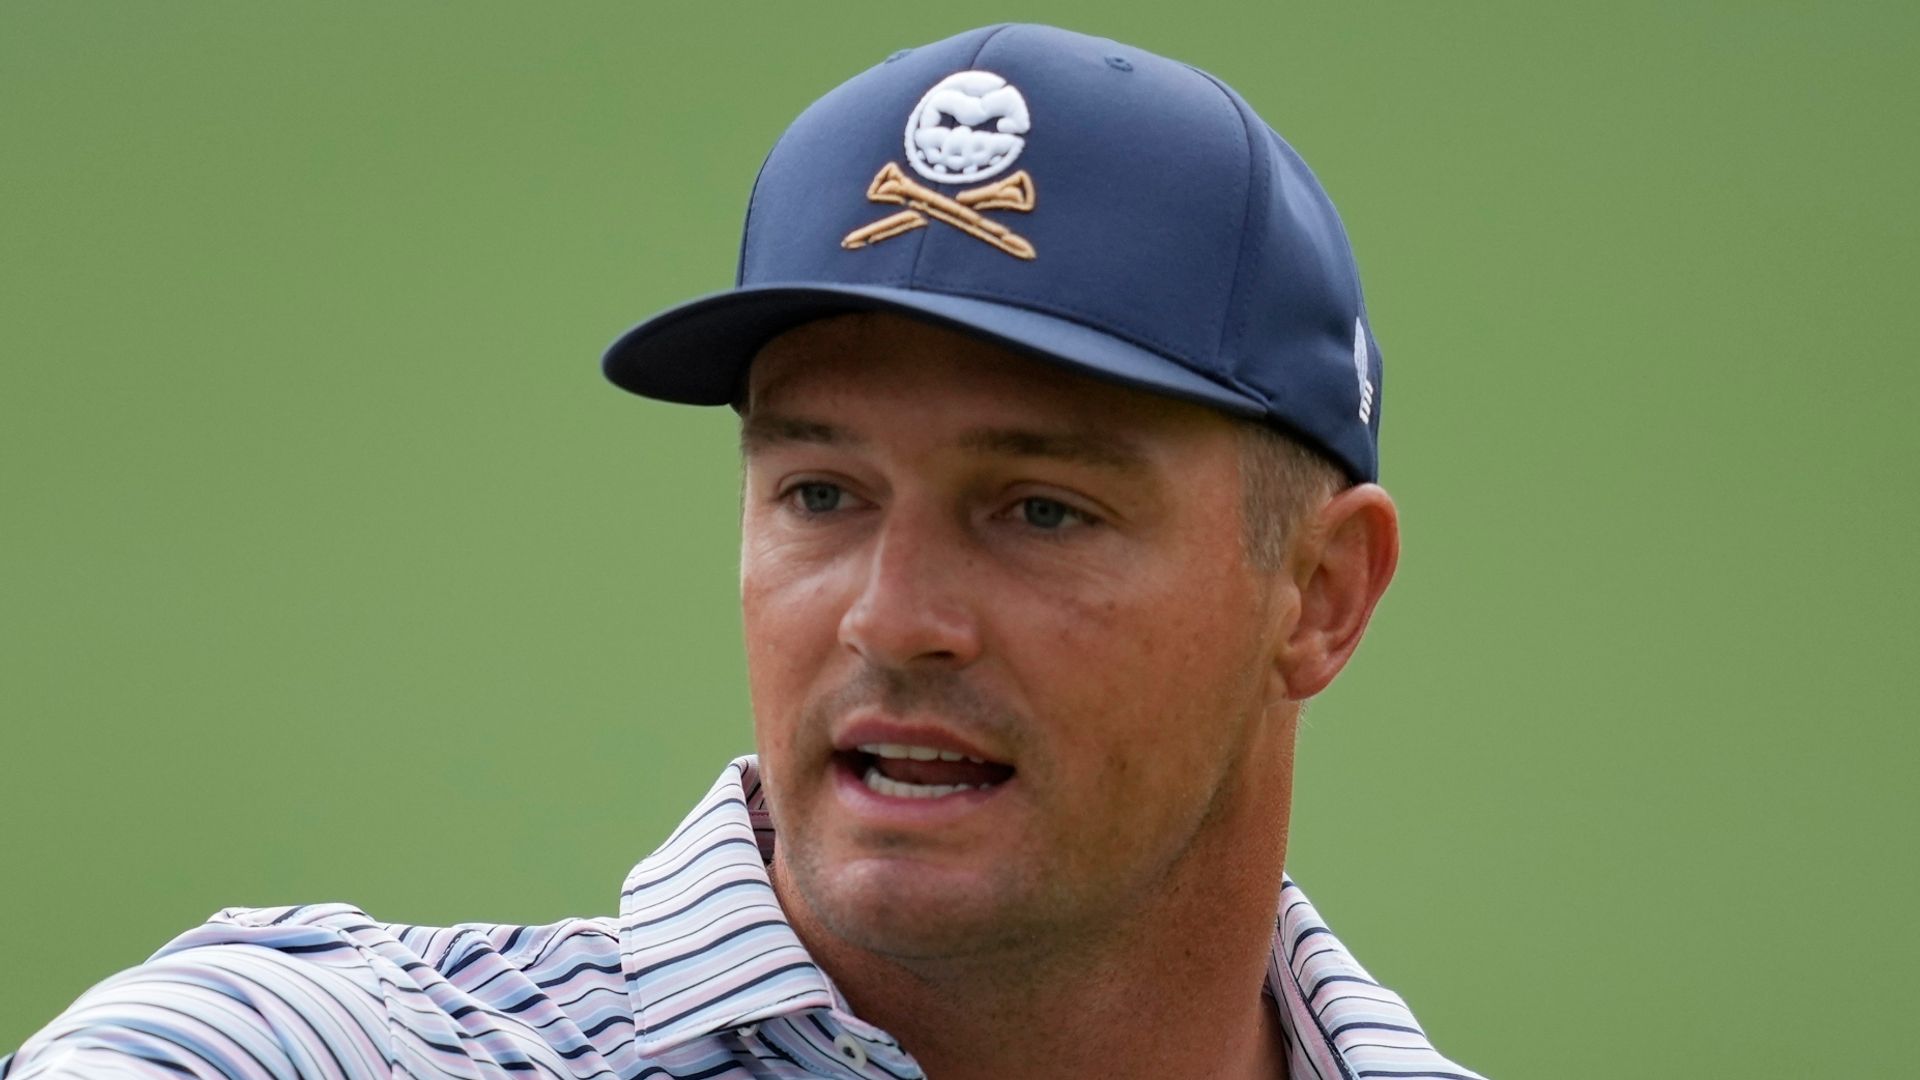 DeChambeau admits he 'messed up' with past Augusta comments